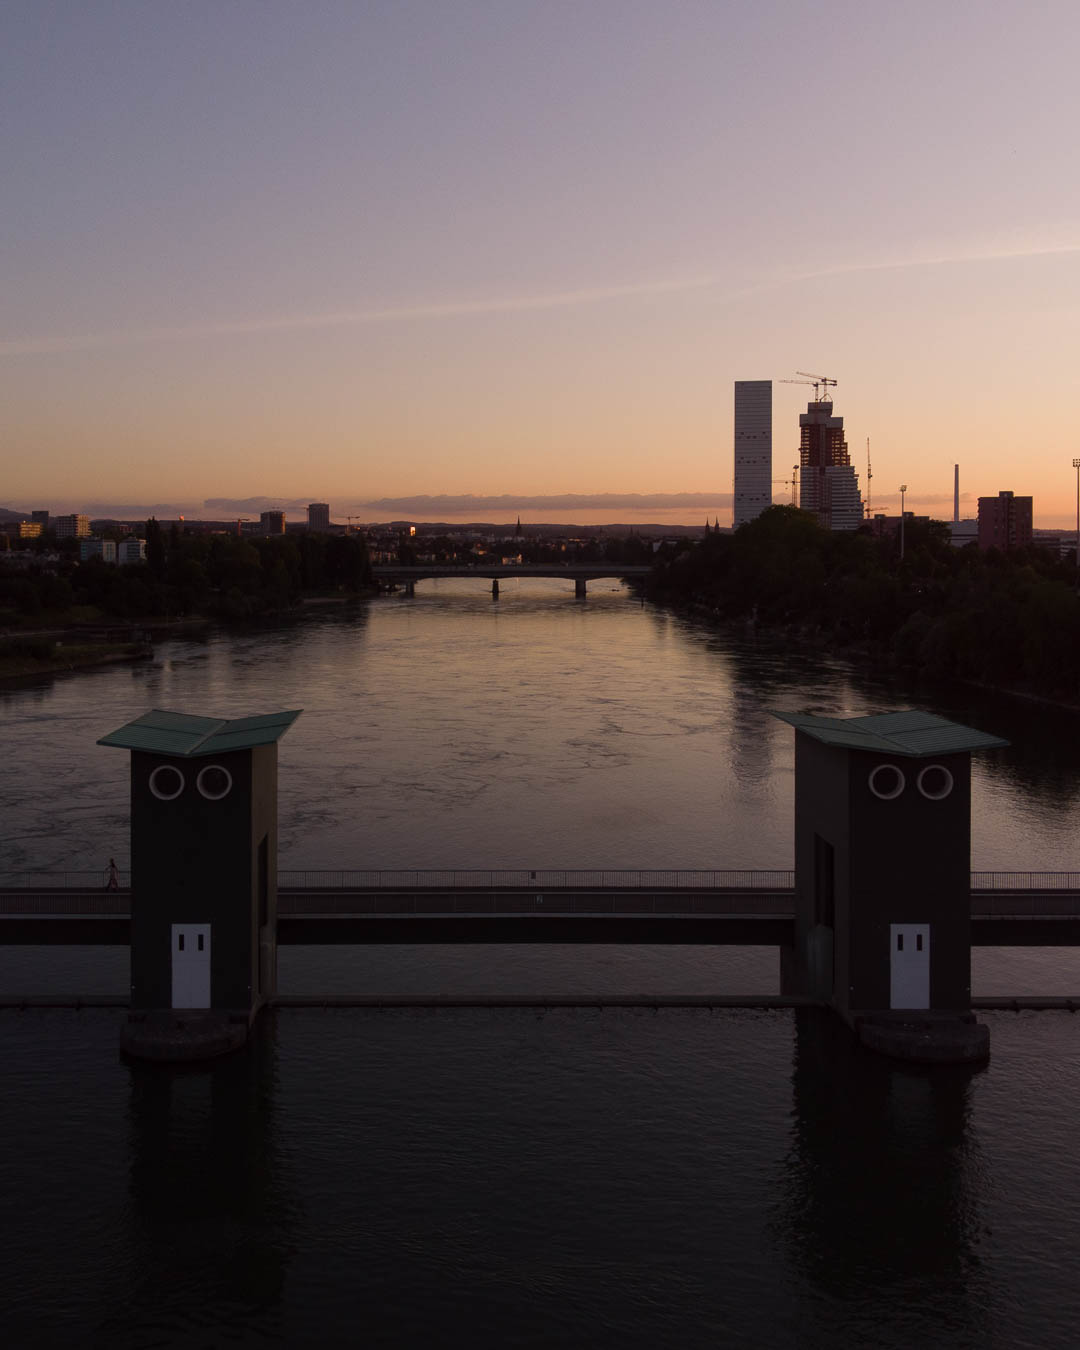 Birsfelden Powerstation with view down the Rhine towards Basel at sunset, unedited raw